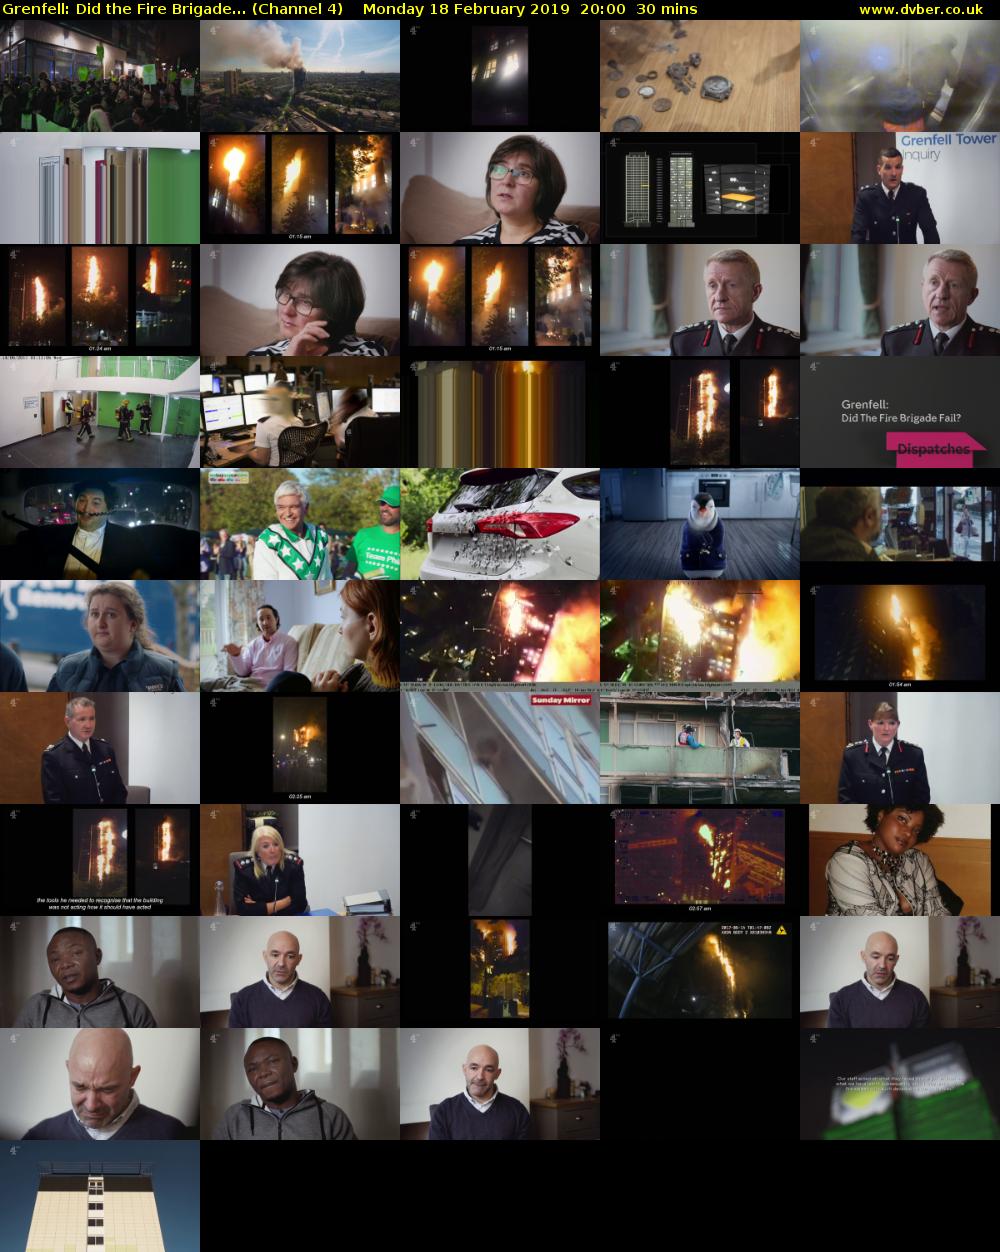 Grenfell: Did the Fire Brigade... (Channel 4) Monday 18 February 2019 20:00 - 20:30